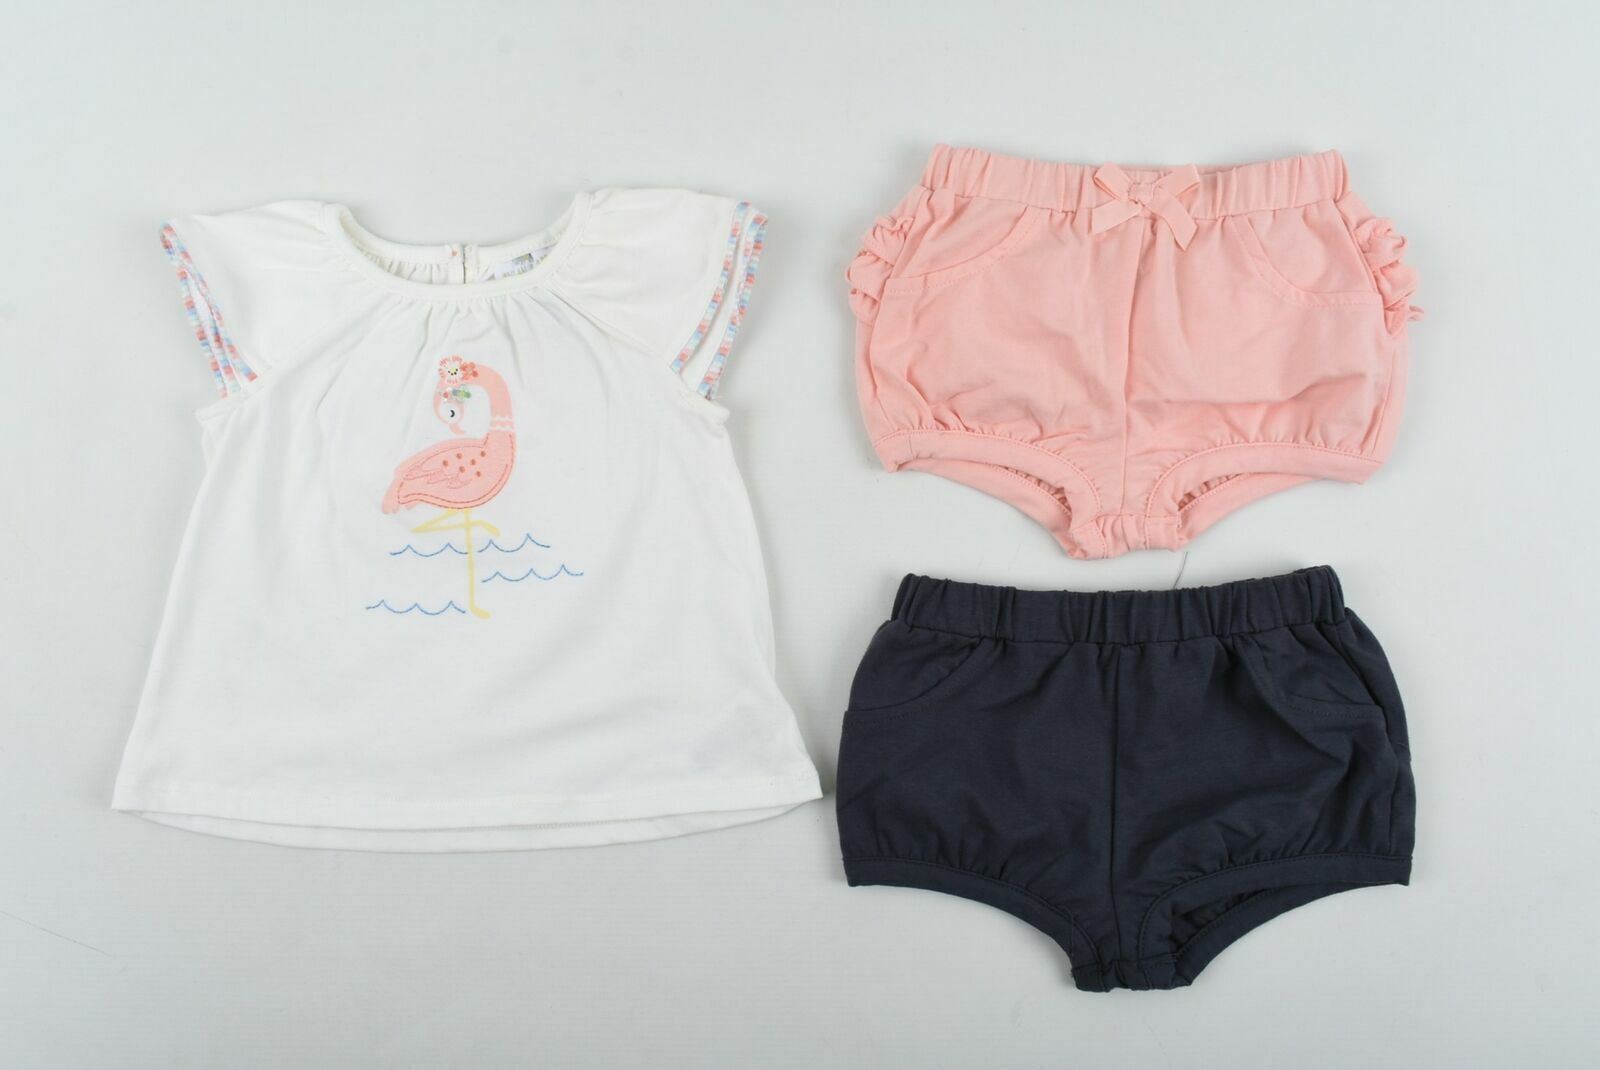 DYLAN & ABBY Baby Girls 3-Pc Set- Top & Shorts x2- White, Pink, Grey - Age 24 M